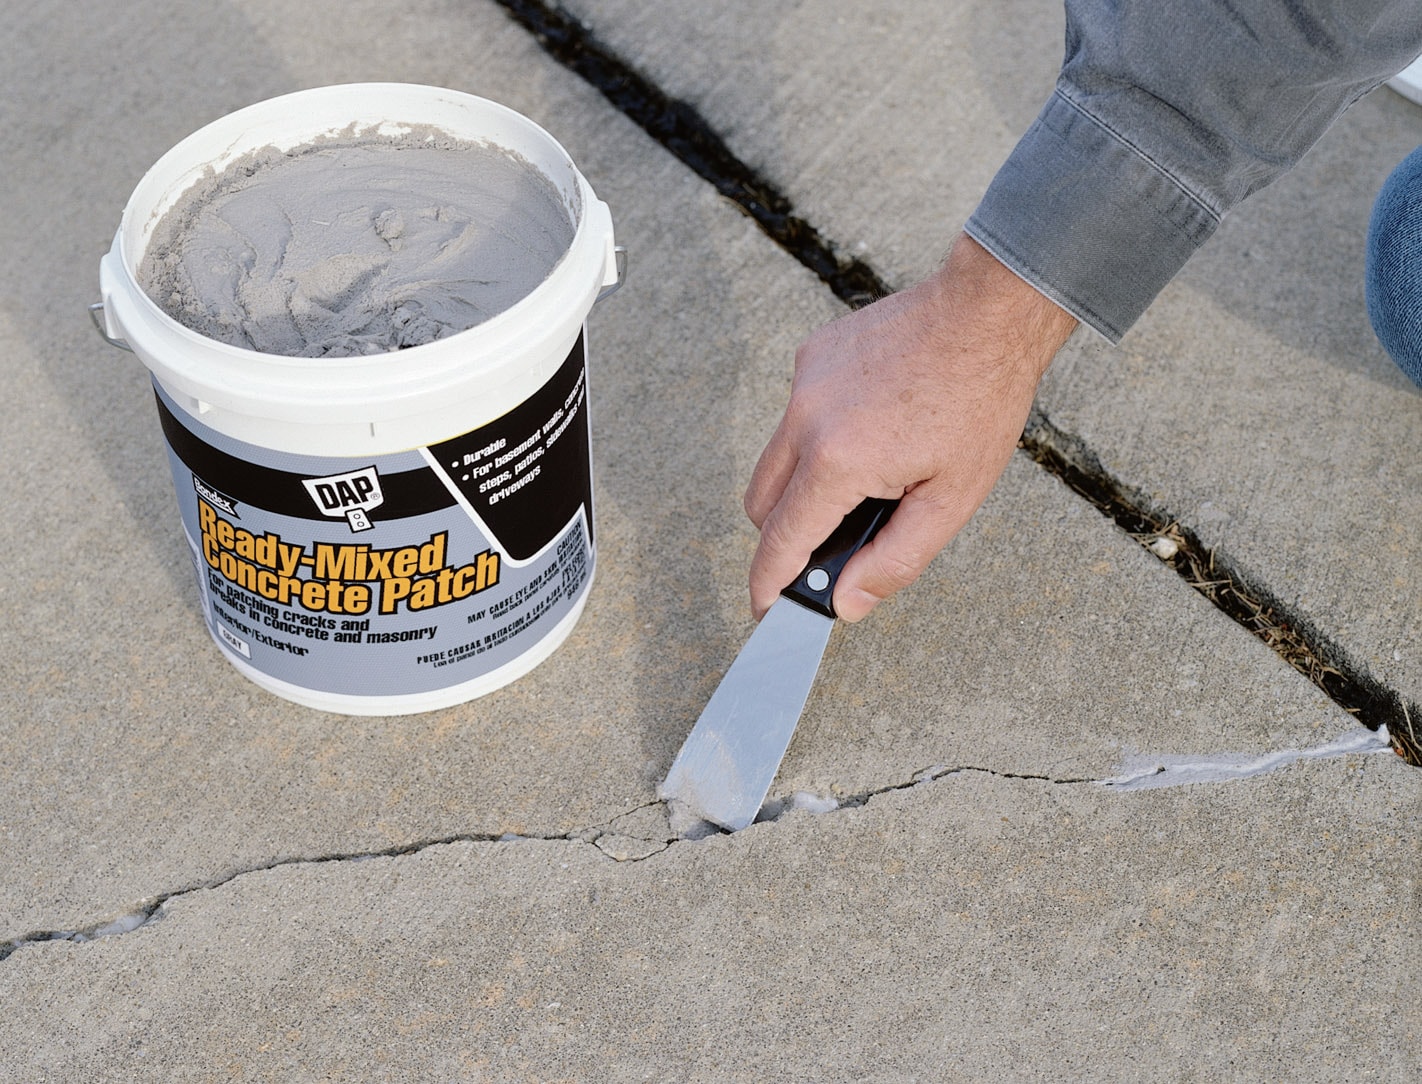 DAP 32-oz Waterproof Interior/Exterior Gray Patch in Patching & Spackling Compound department at